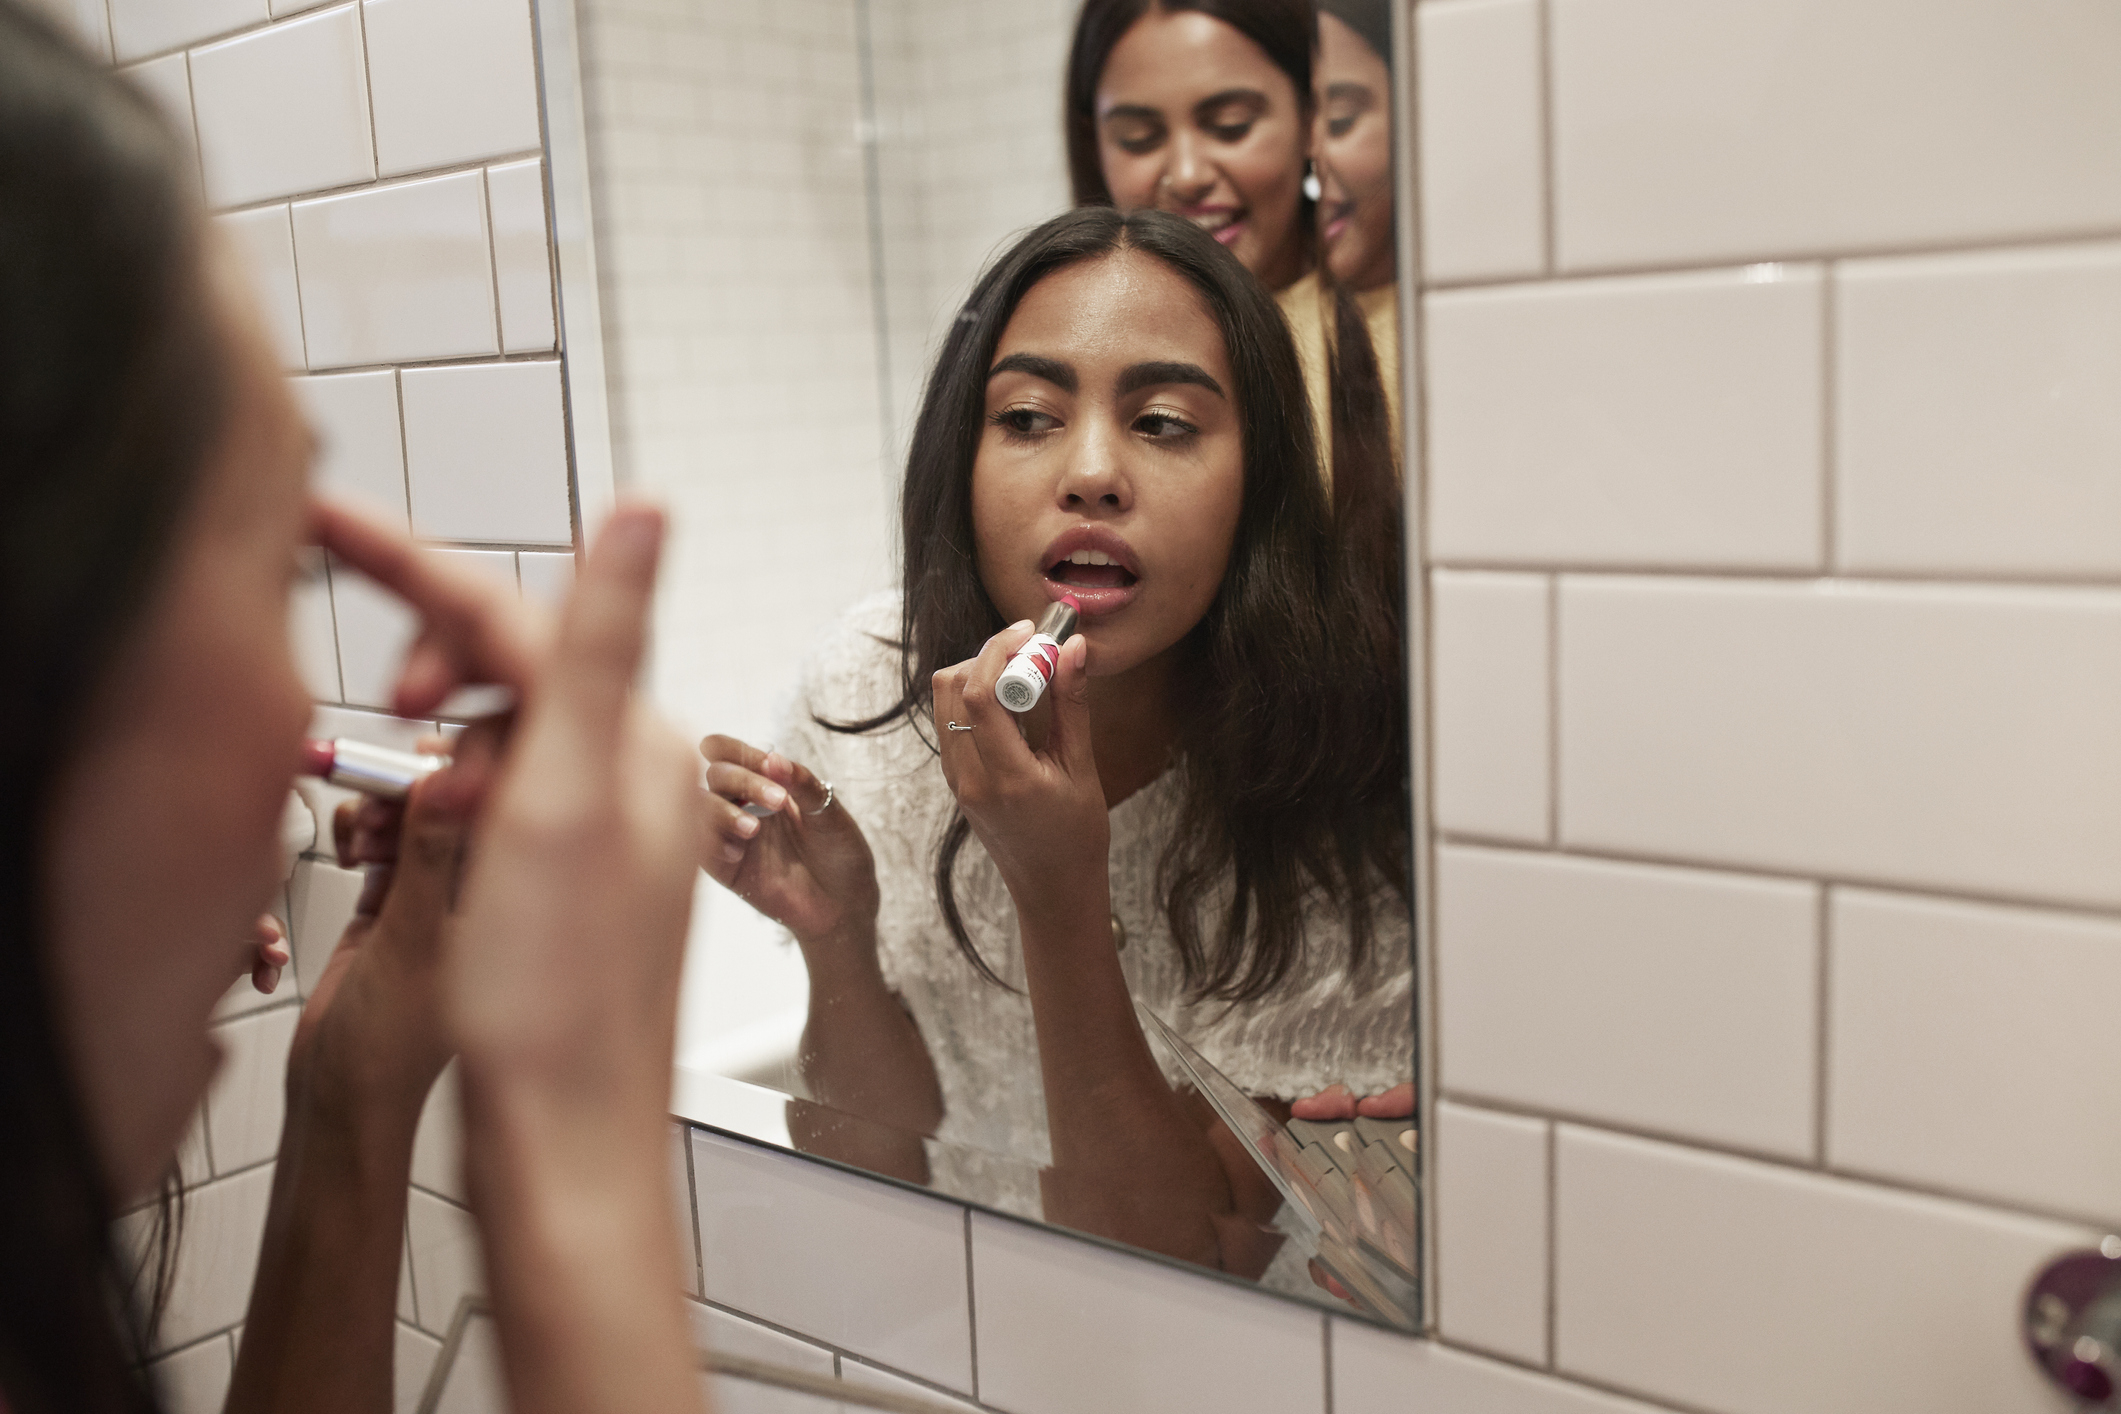 A woman is applying lipstick in front of a mirror